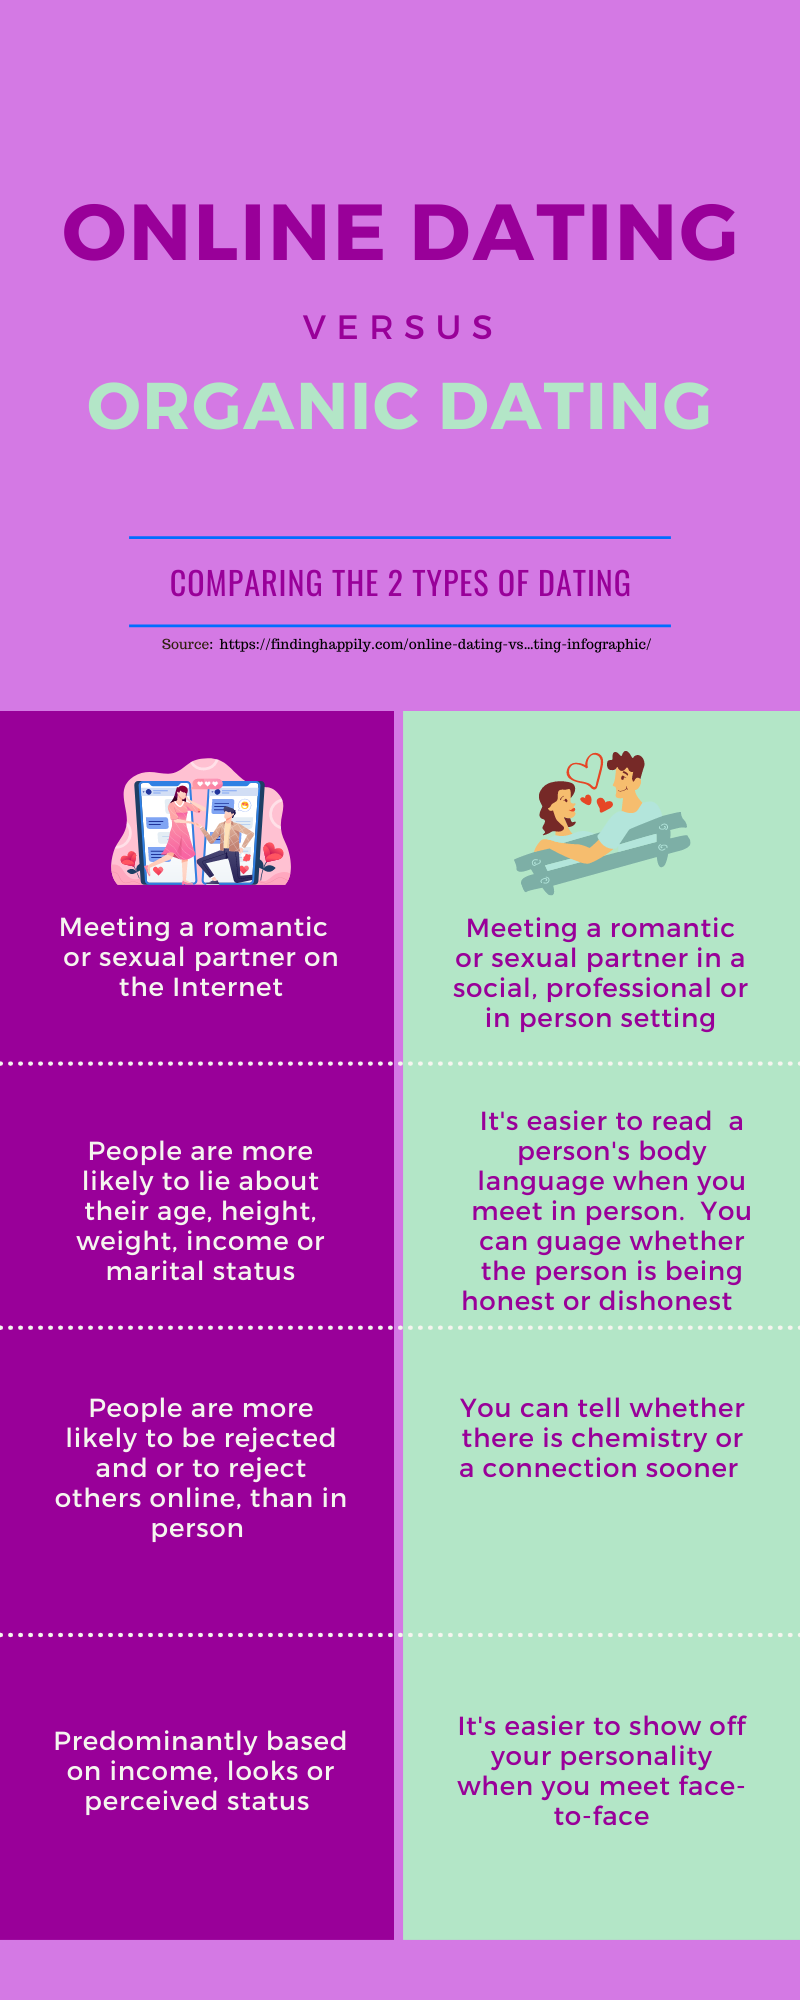 pros and cons of online dating vs traditional dating